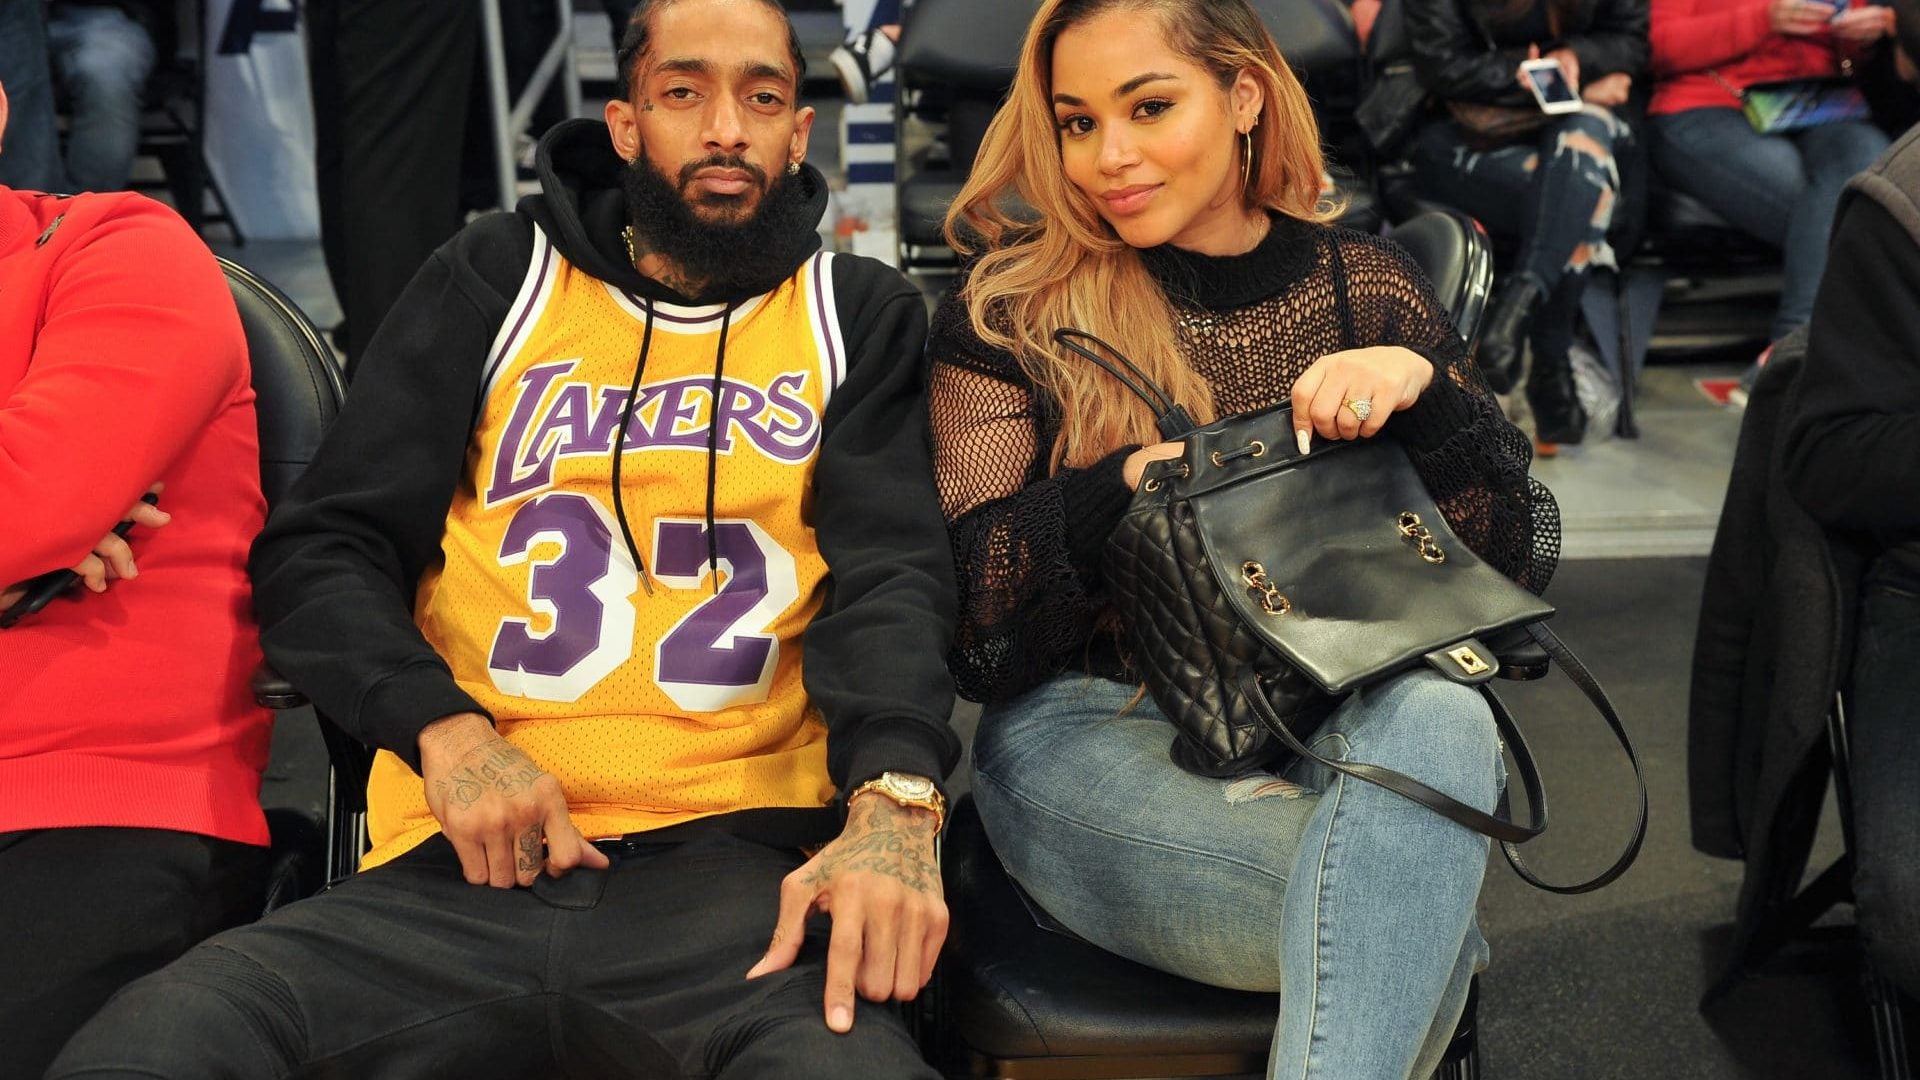 Lauren London Speaks On Nipsey Hussle's Death: 'I'm Lost Without You'